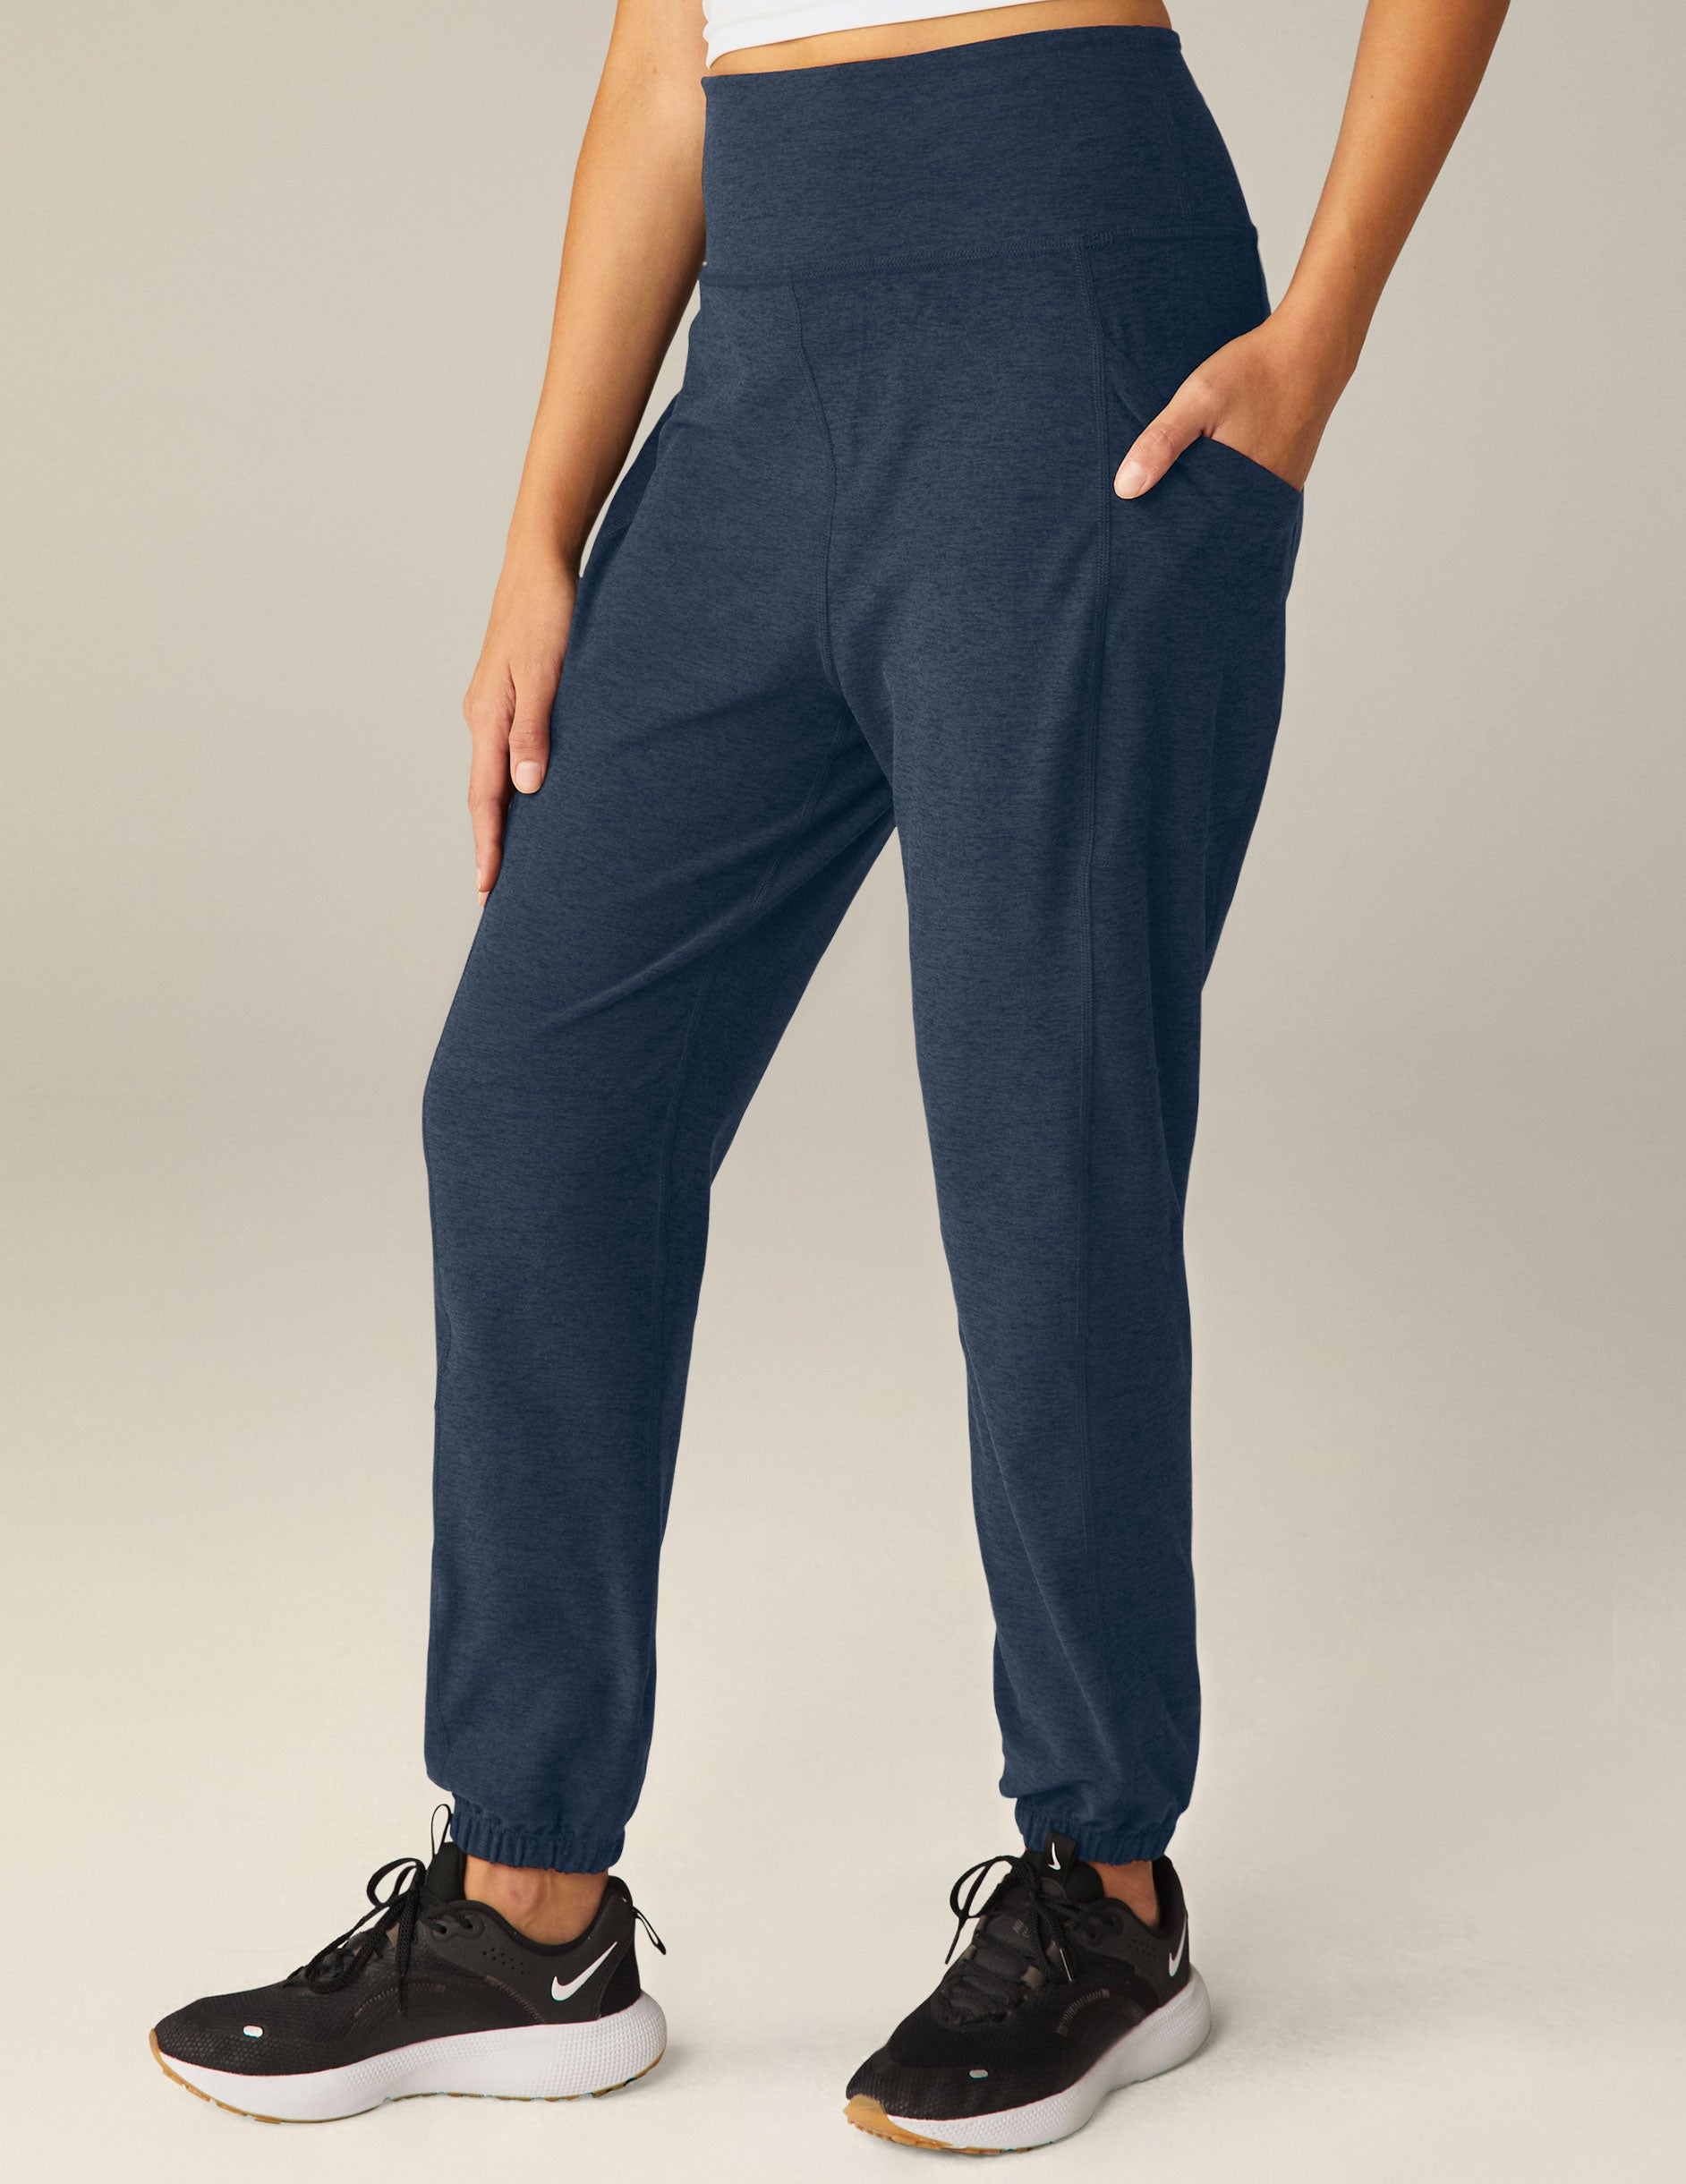 Beyond Yoga Spacedye Commuter Midi Joggers  Anthropologie Singapore -  Women's Clothing, Accessories & Home